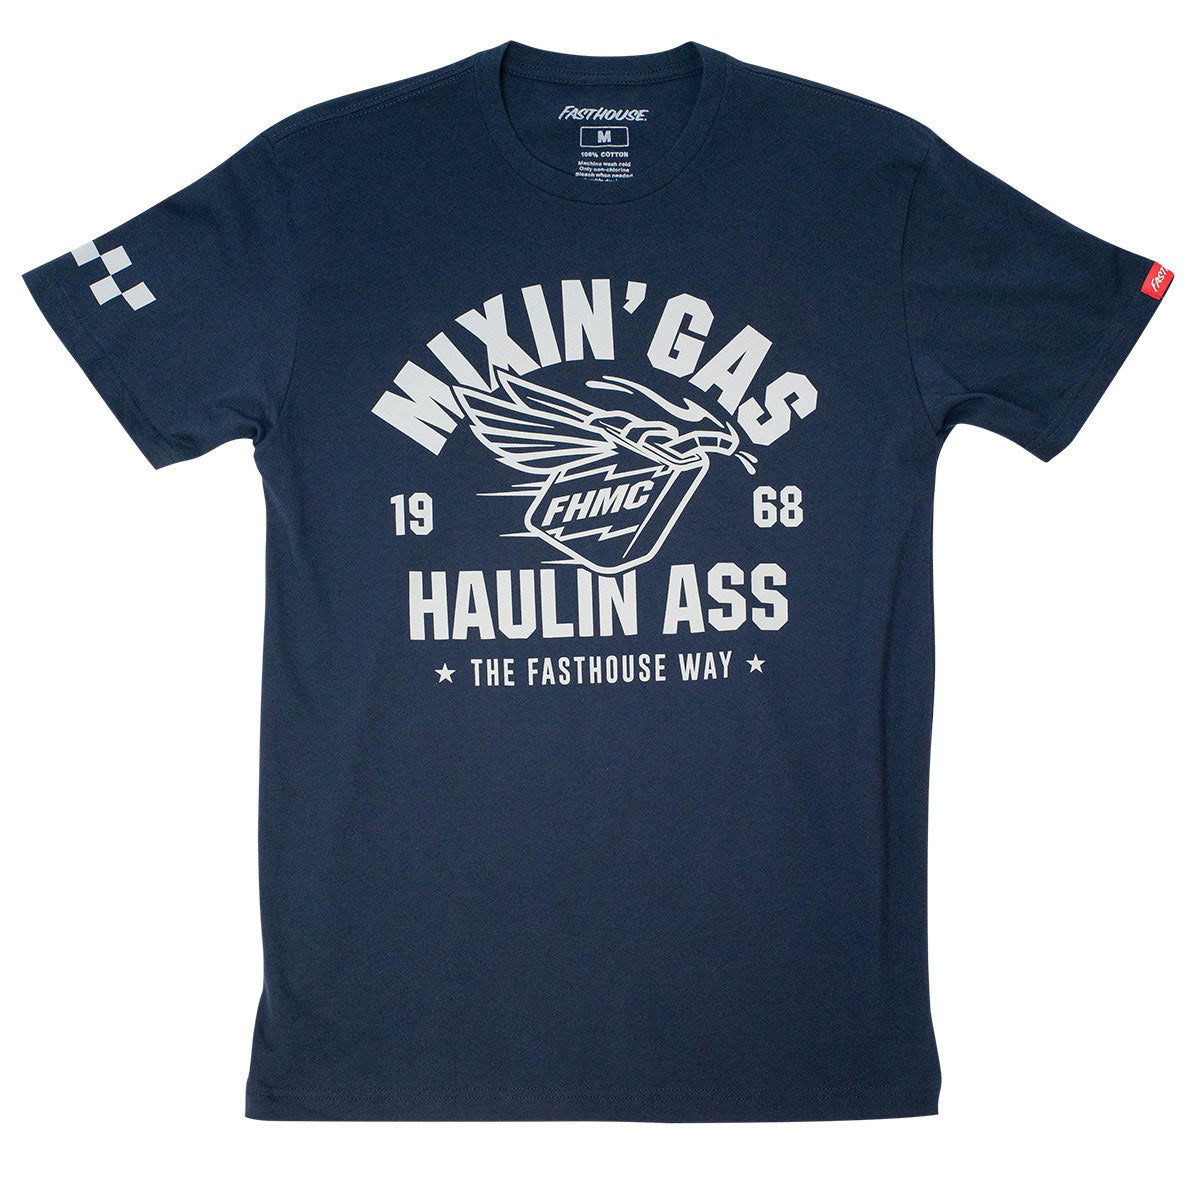 Mixing Gas Pro Am SS Tee - Navy